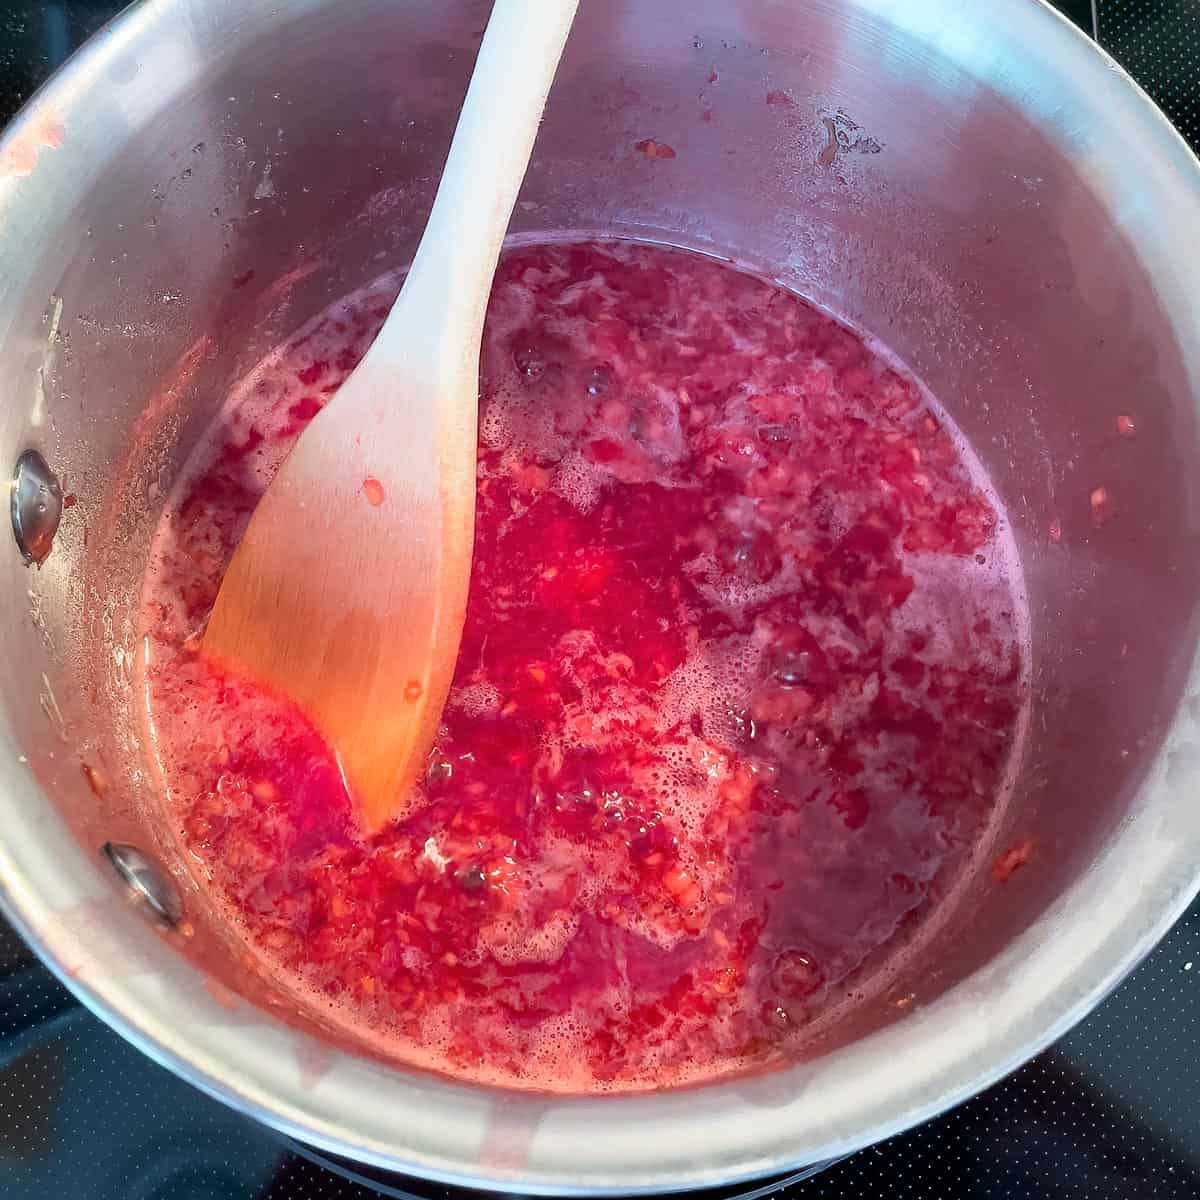 Raspberries on a low boil to break them up using the back of a wooden spoon.